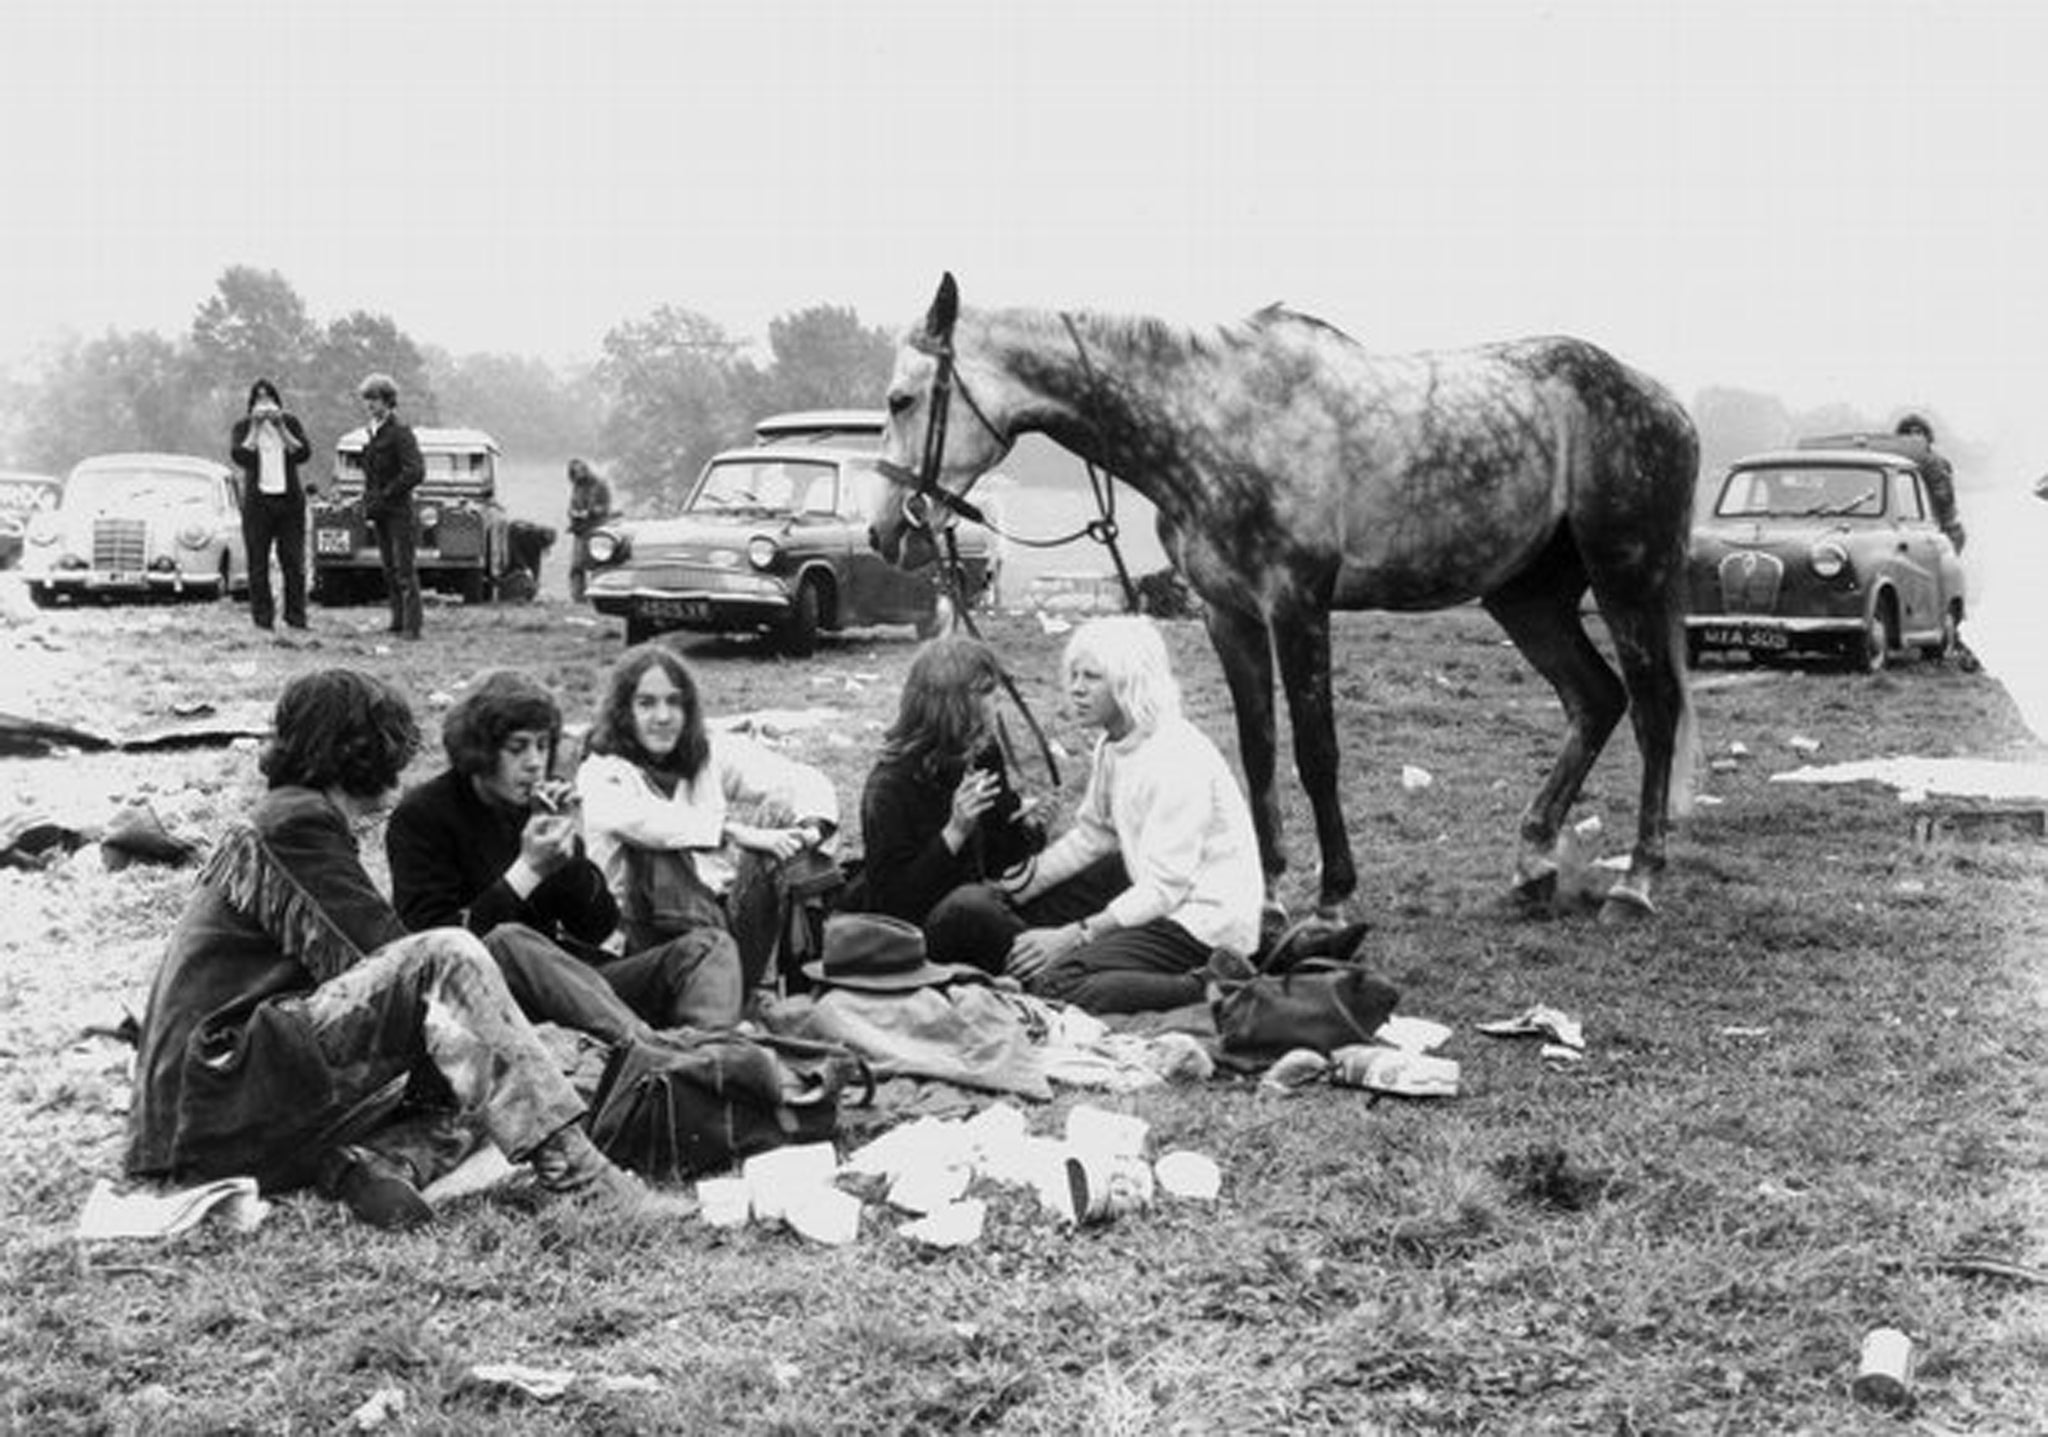 Festival goers enjoy the sunset in a photo to be kept in the V&A's Glastonbury archive